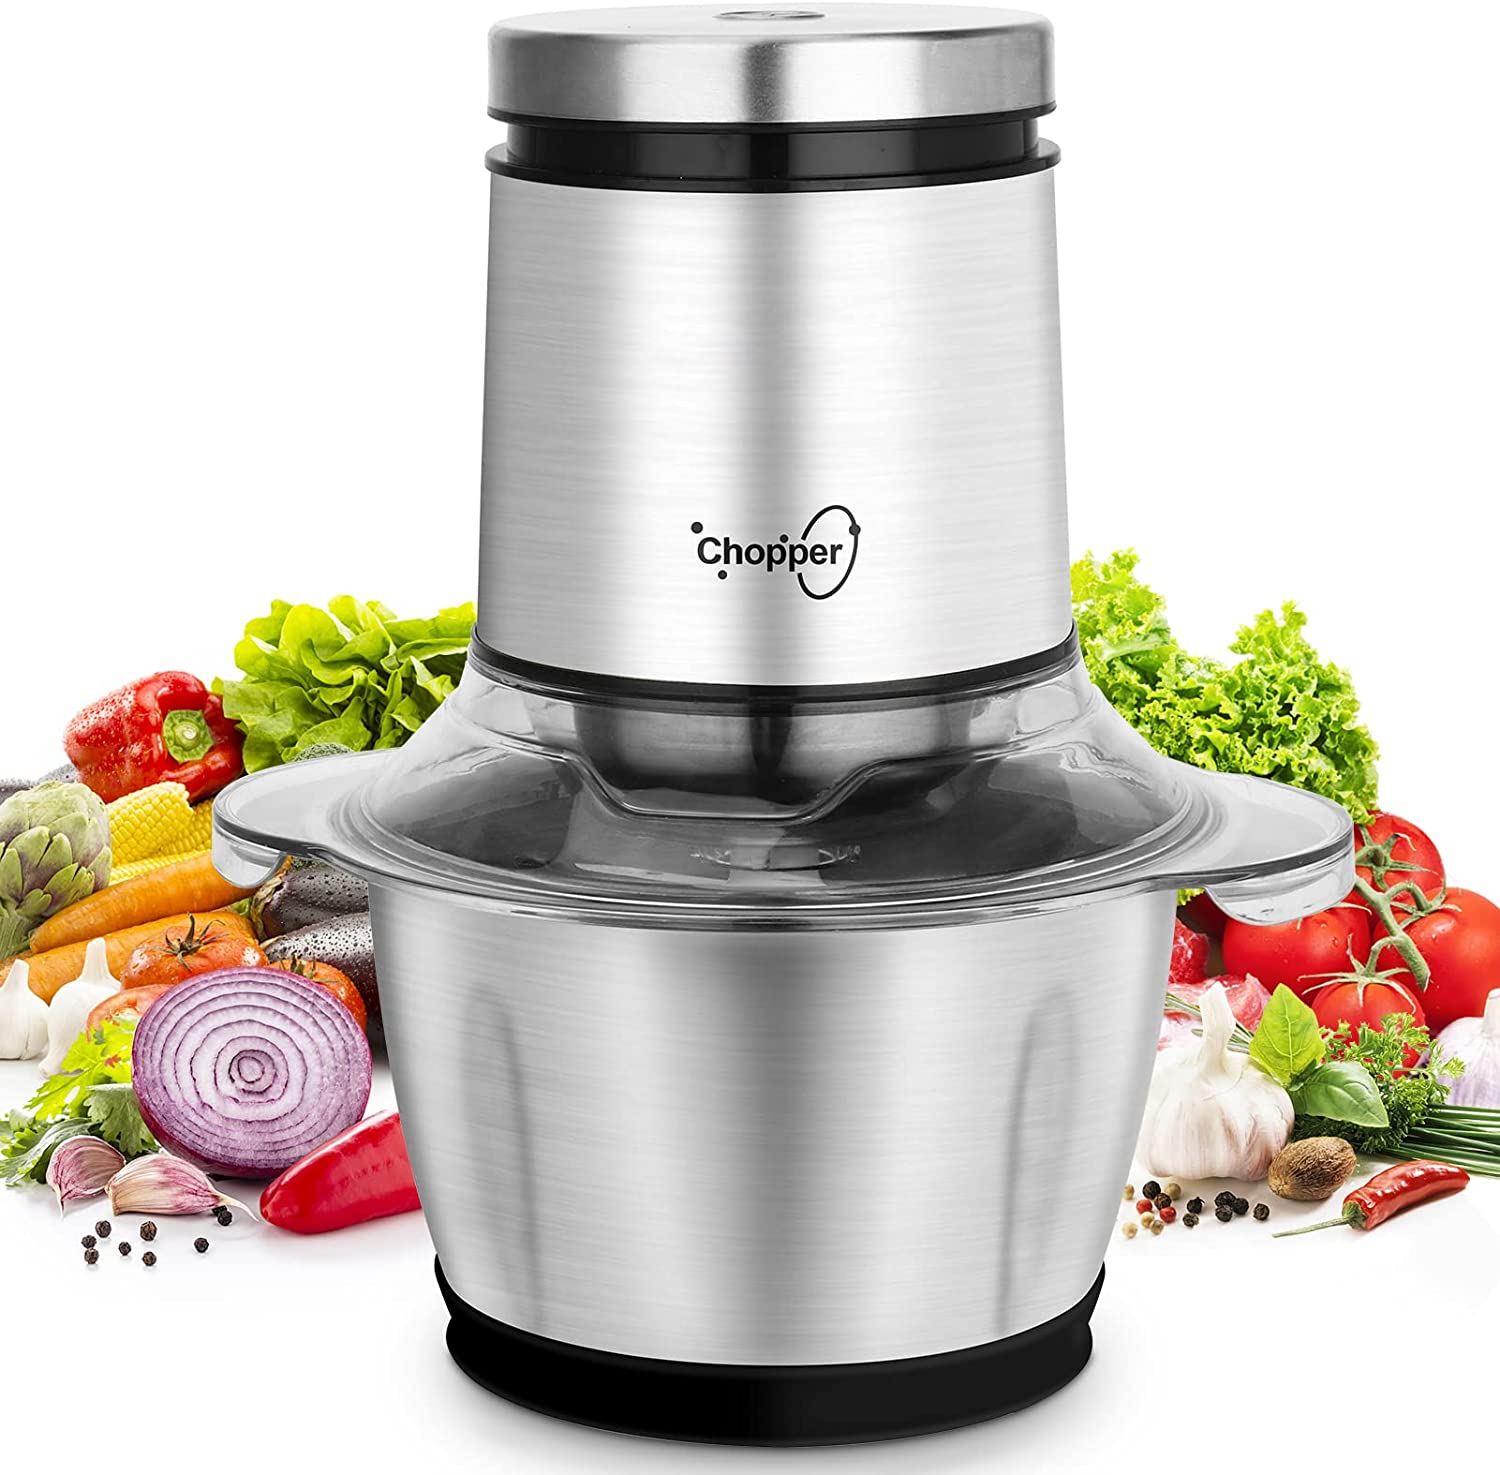 Vpcok Direct Electric Kitchen Chopper, Onion Cutter, 1.2 L Stainless Steel Container, Mu